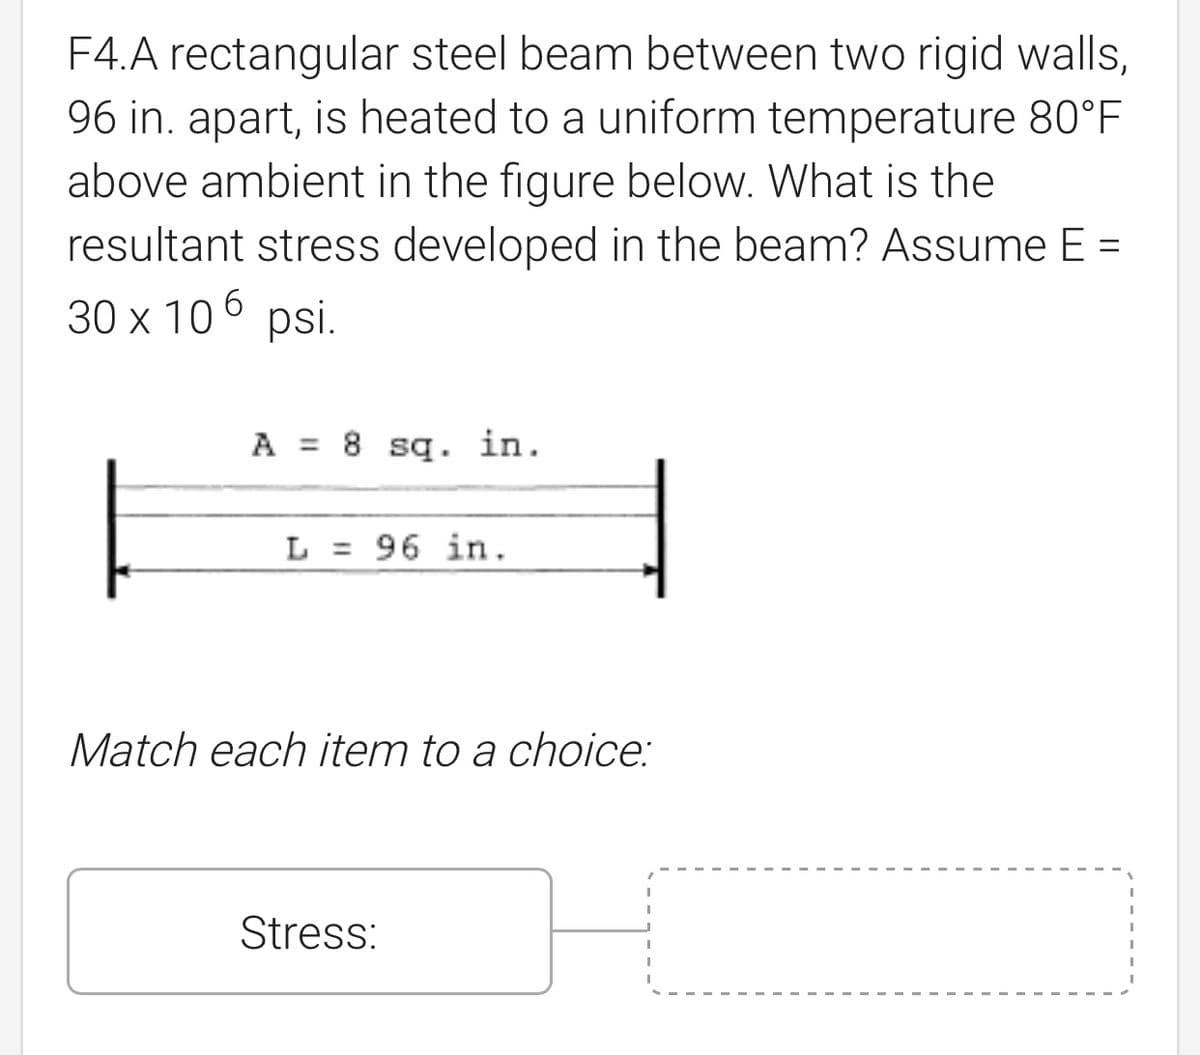 F4.A rectangular steel beam between two rigid walls,
96 in. apart, is heated to a uniform temperature 80°F
above ambient in the figure below. What is the
resultant stress developed in the beam? Assume E =
30 x 106 psi.
A 8 sq. in.
L = 96 in.
Match each item to a choice:
Stress: